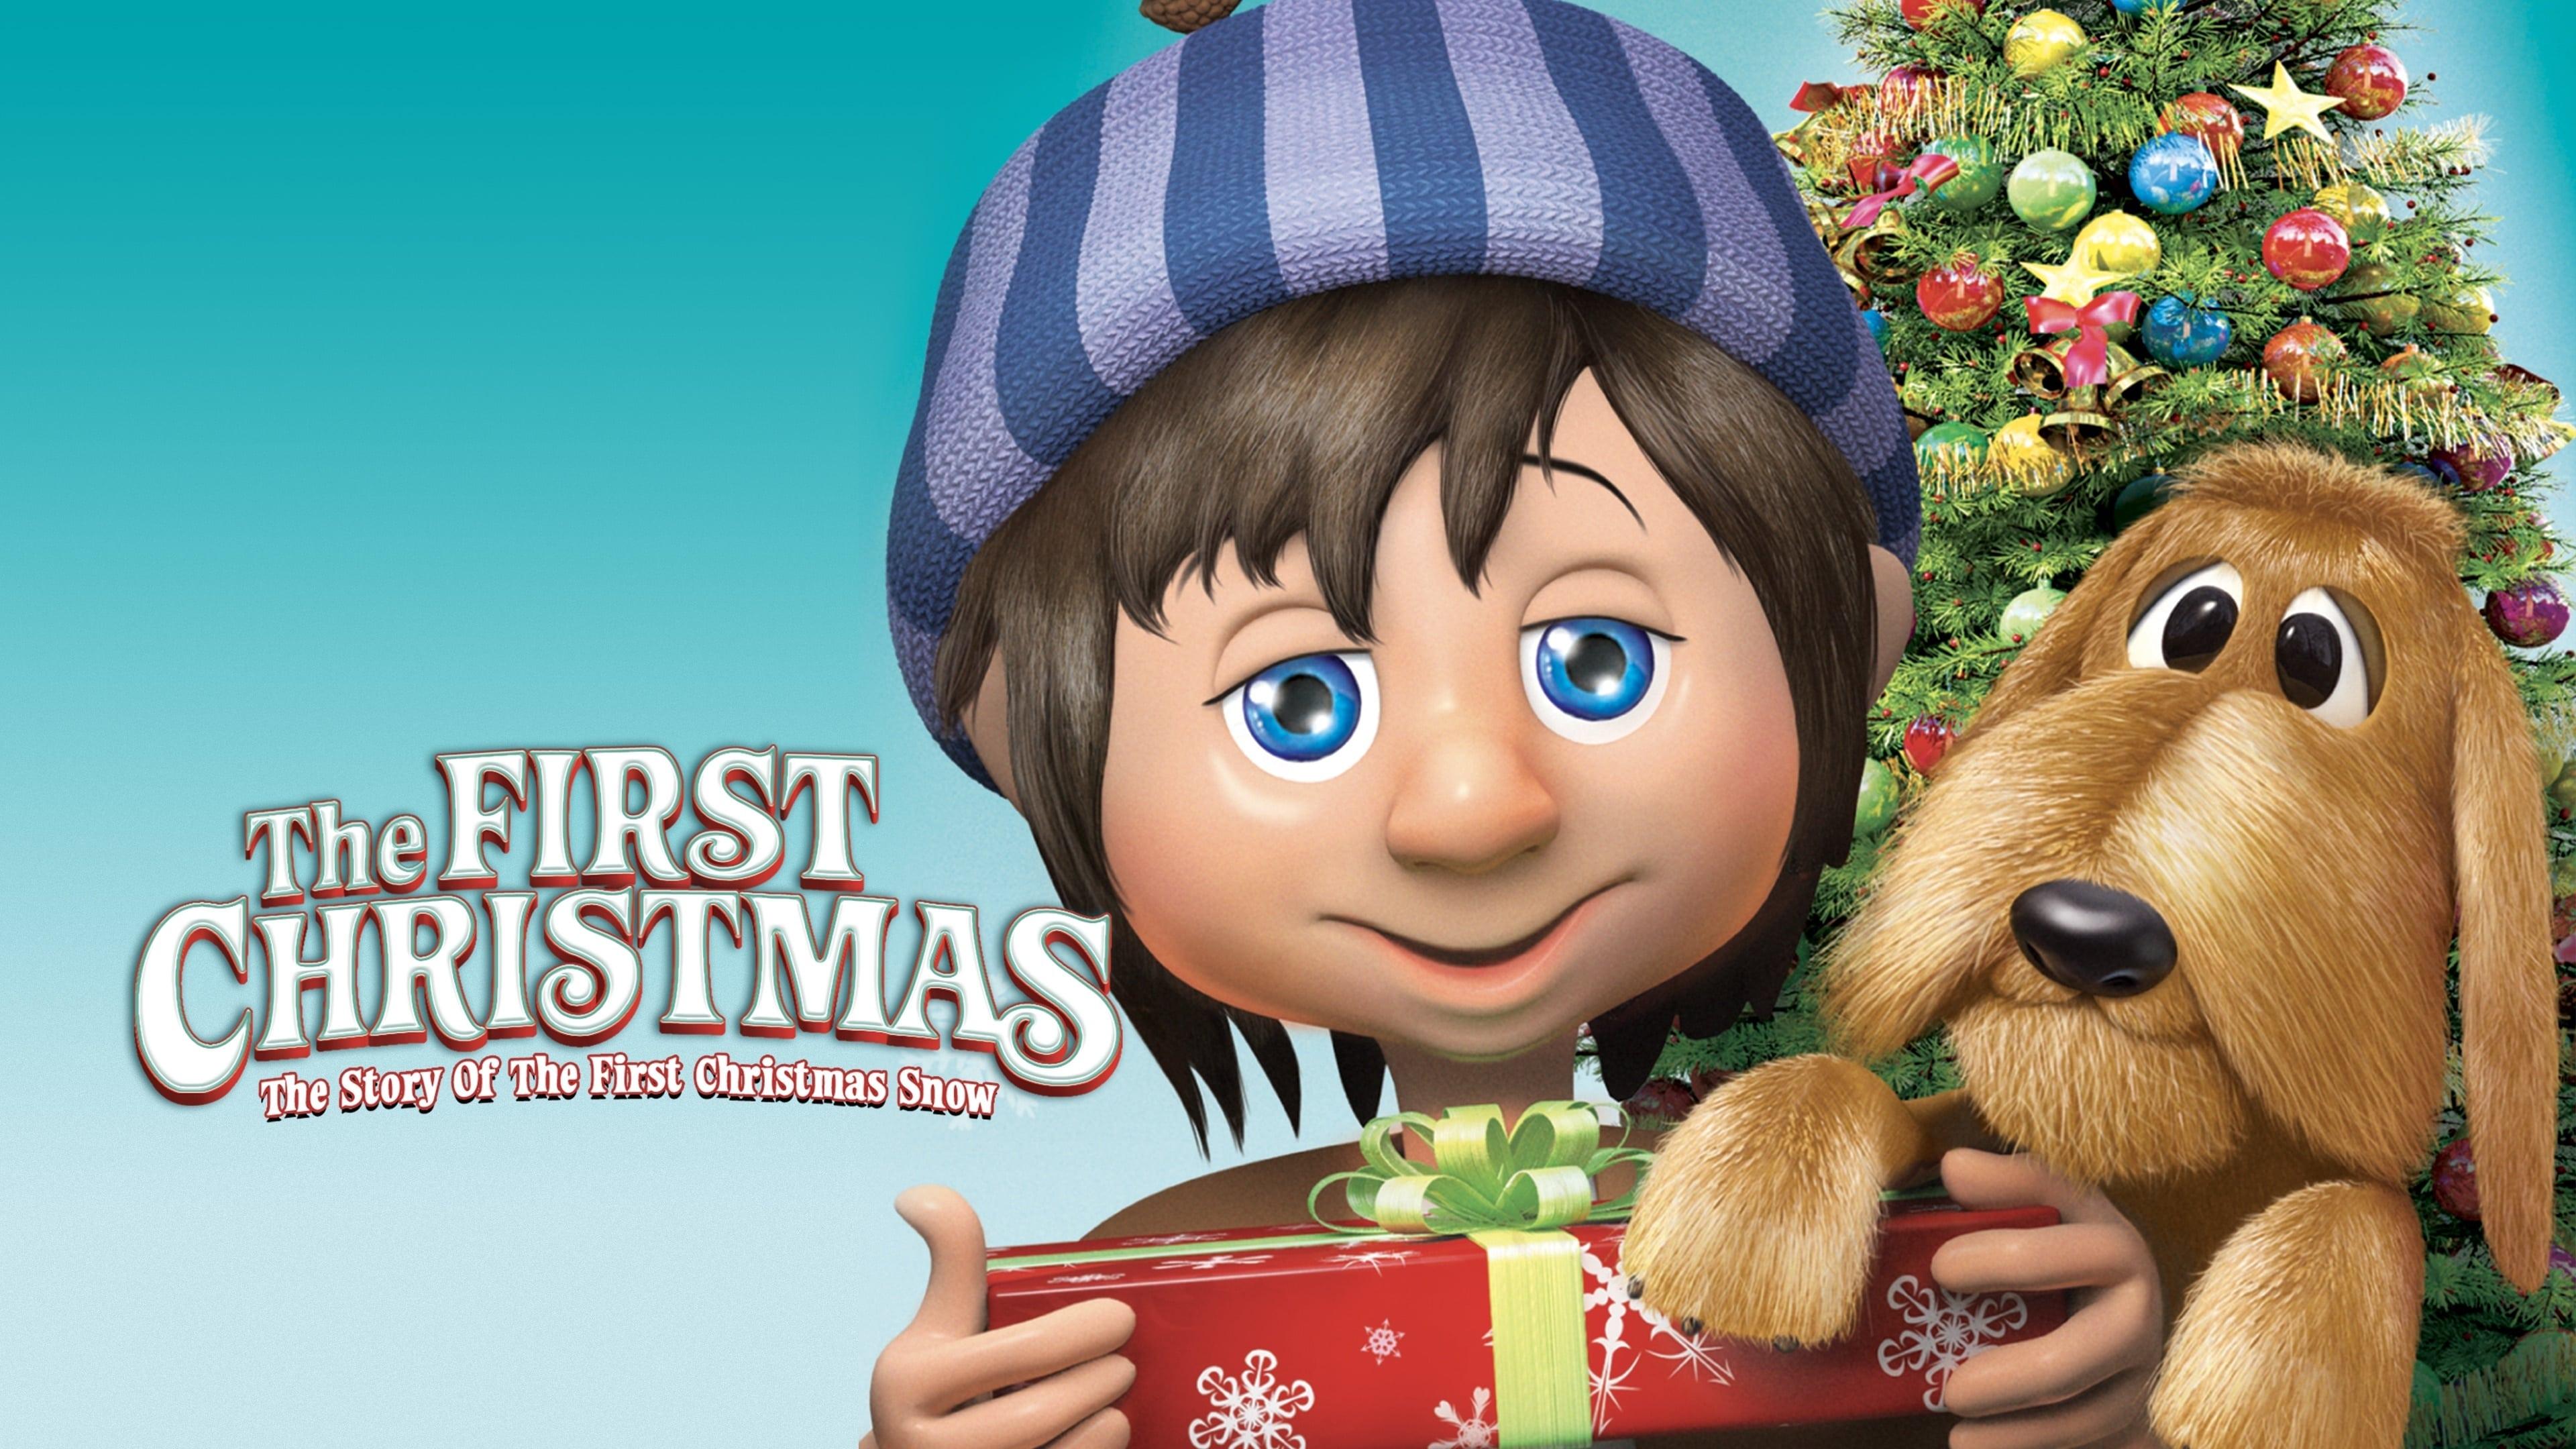 The First Christmas: The Story of the First Christmas Snow backdrop